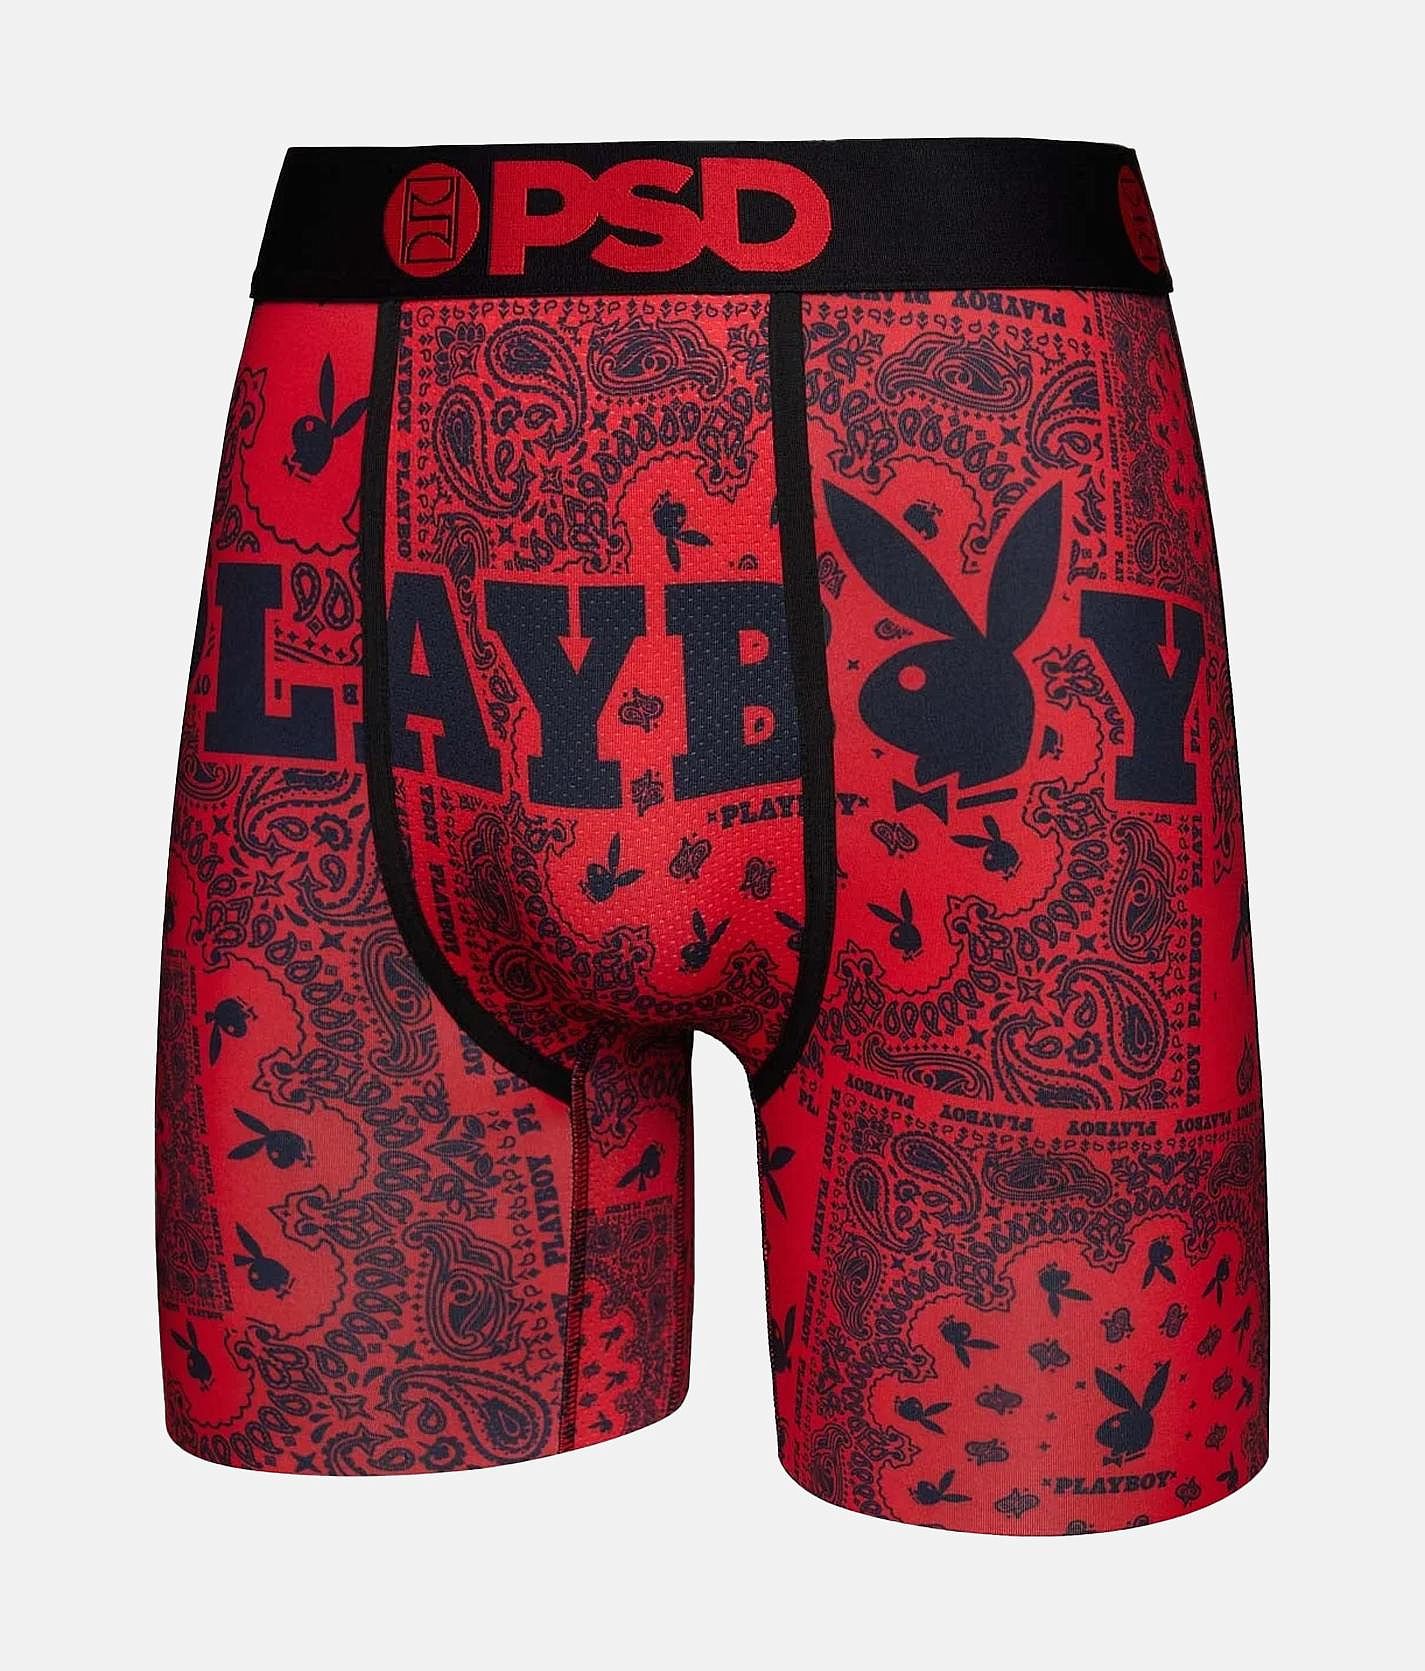 Shinesty® The Mascot Stretch Boxer Briefs - Men's Boxers in Red